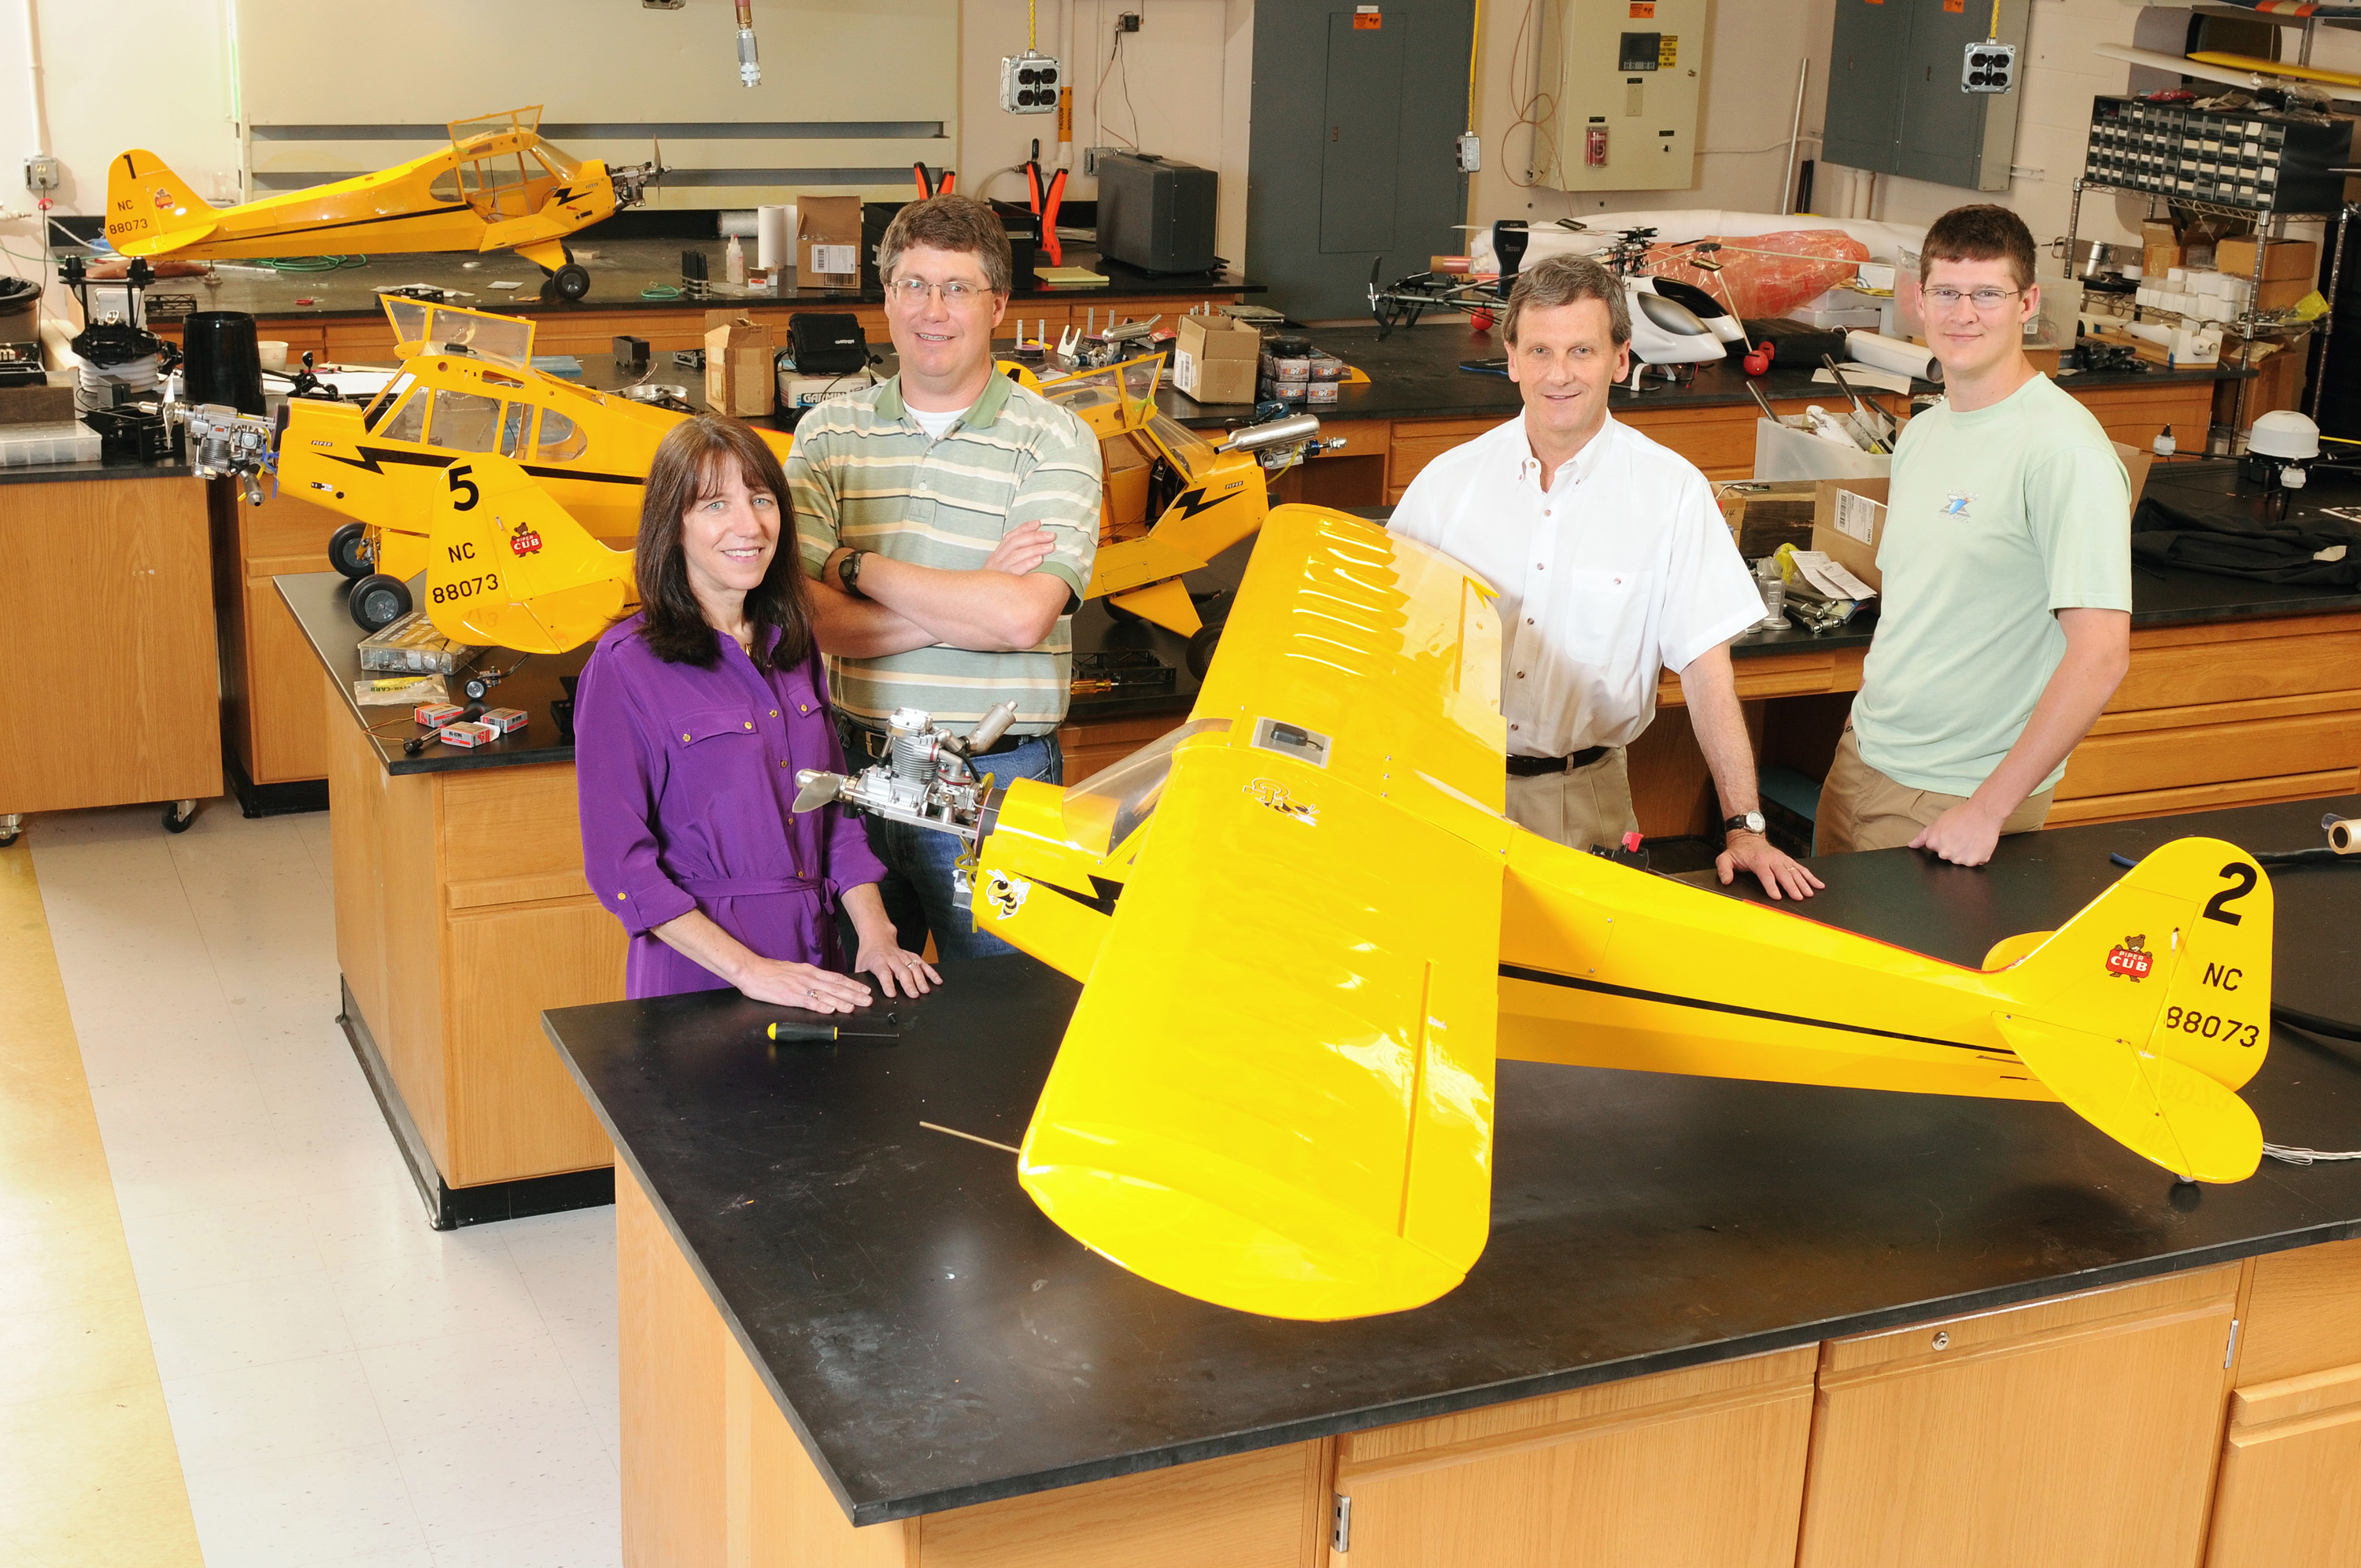 The Georgia Tech Research Institute (GTRI) uses quarter-scale Piper Cub aircraft for research on collaboration between unmanned aerial vehicles. Shown with the aircraft are (l-r) Lora Weiss, Gary Gray, Don Davis and Kyle Carnahan. (Photo: Gary Meek)